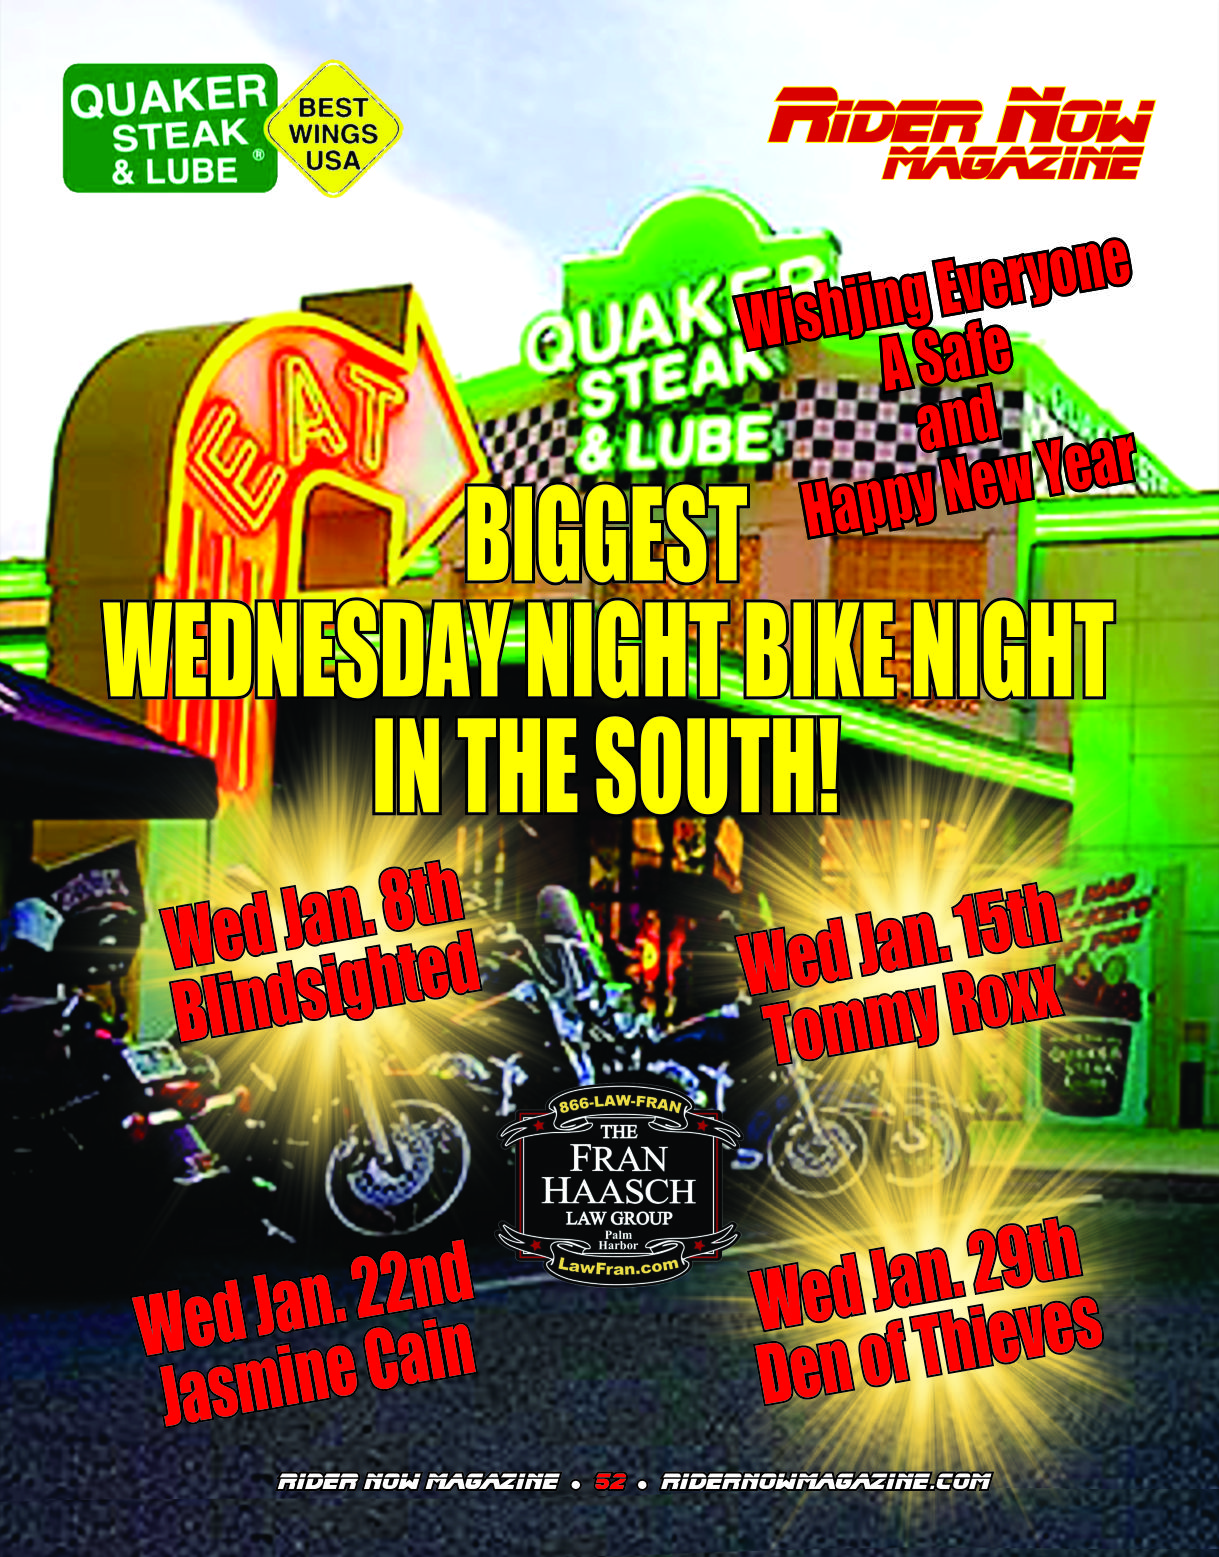 QS&L January Bike Nights and Bands